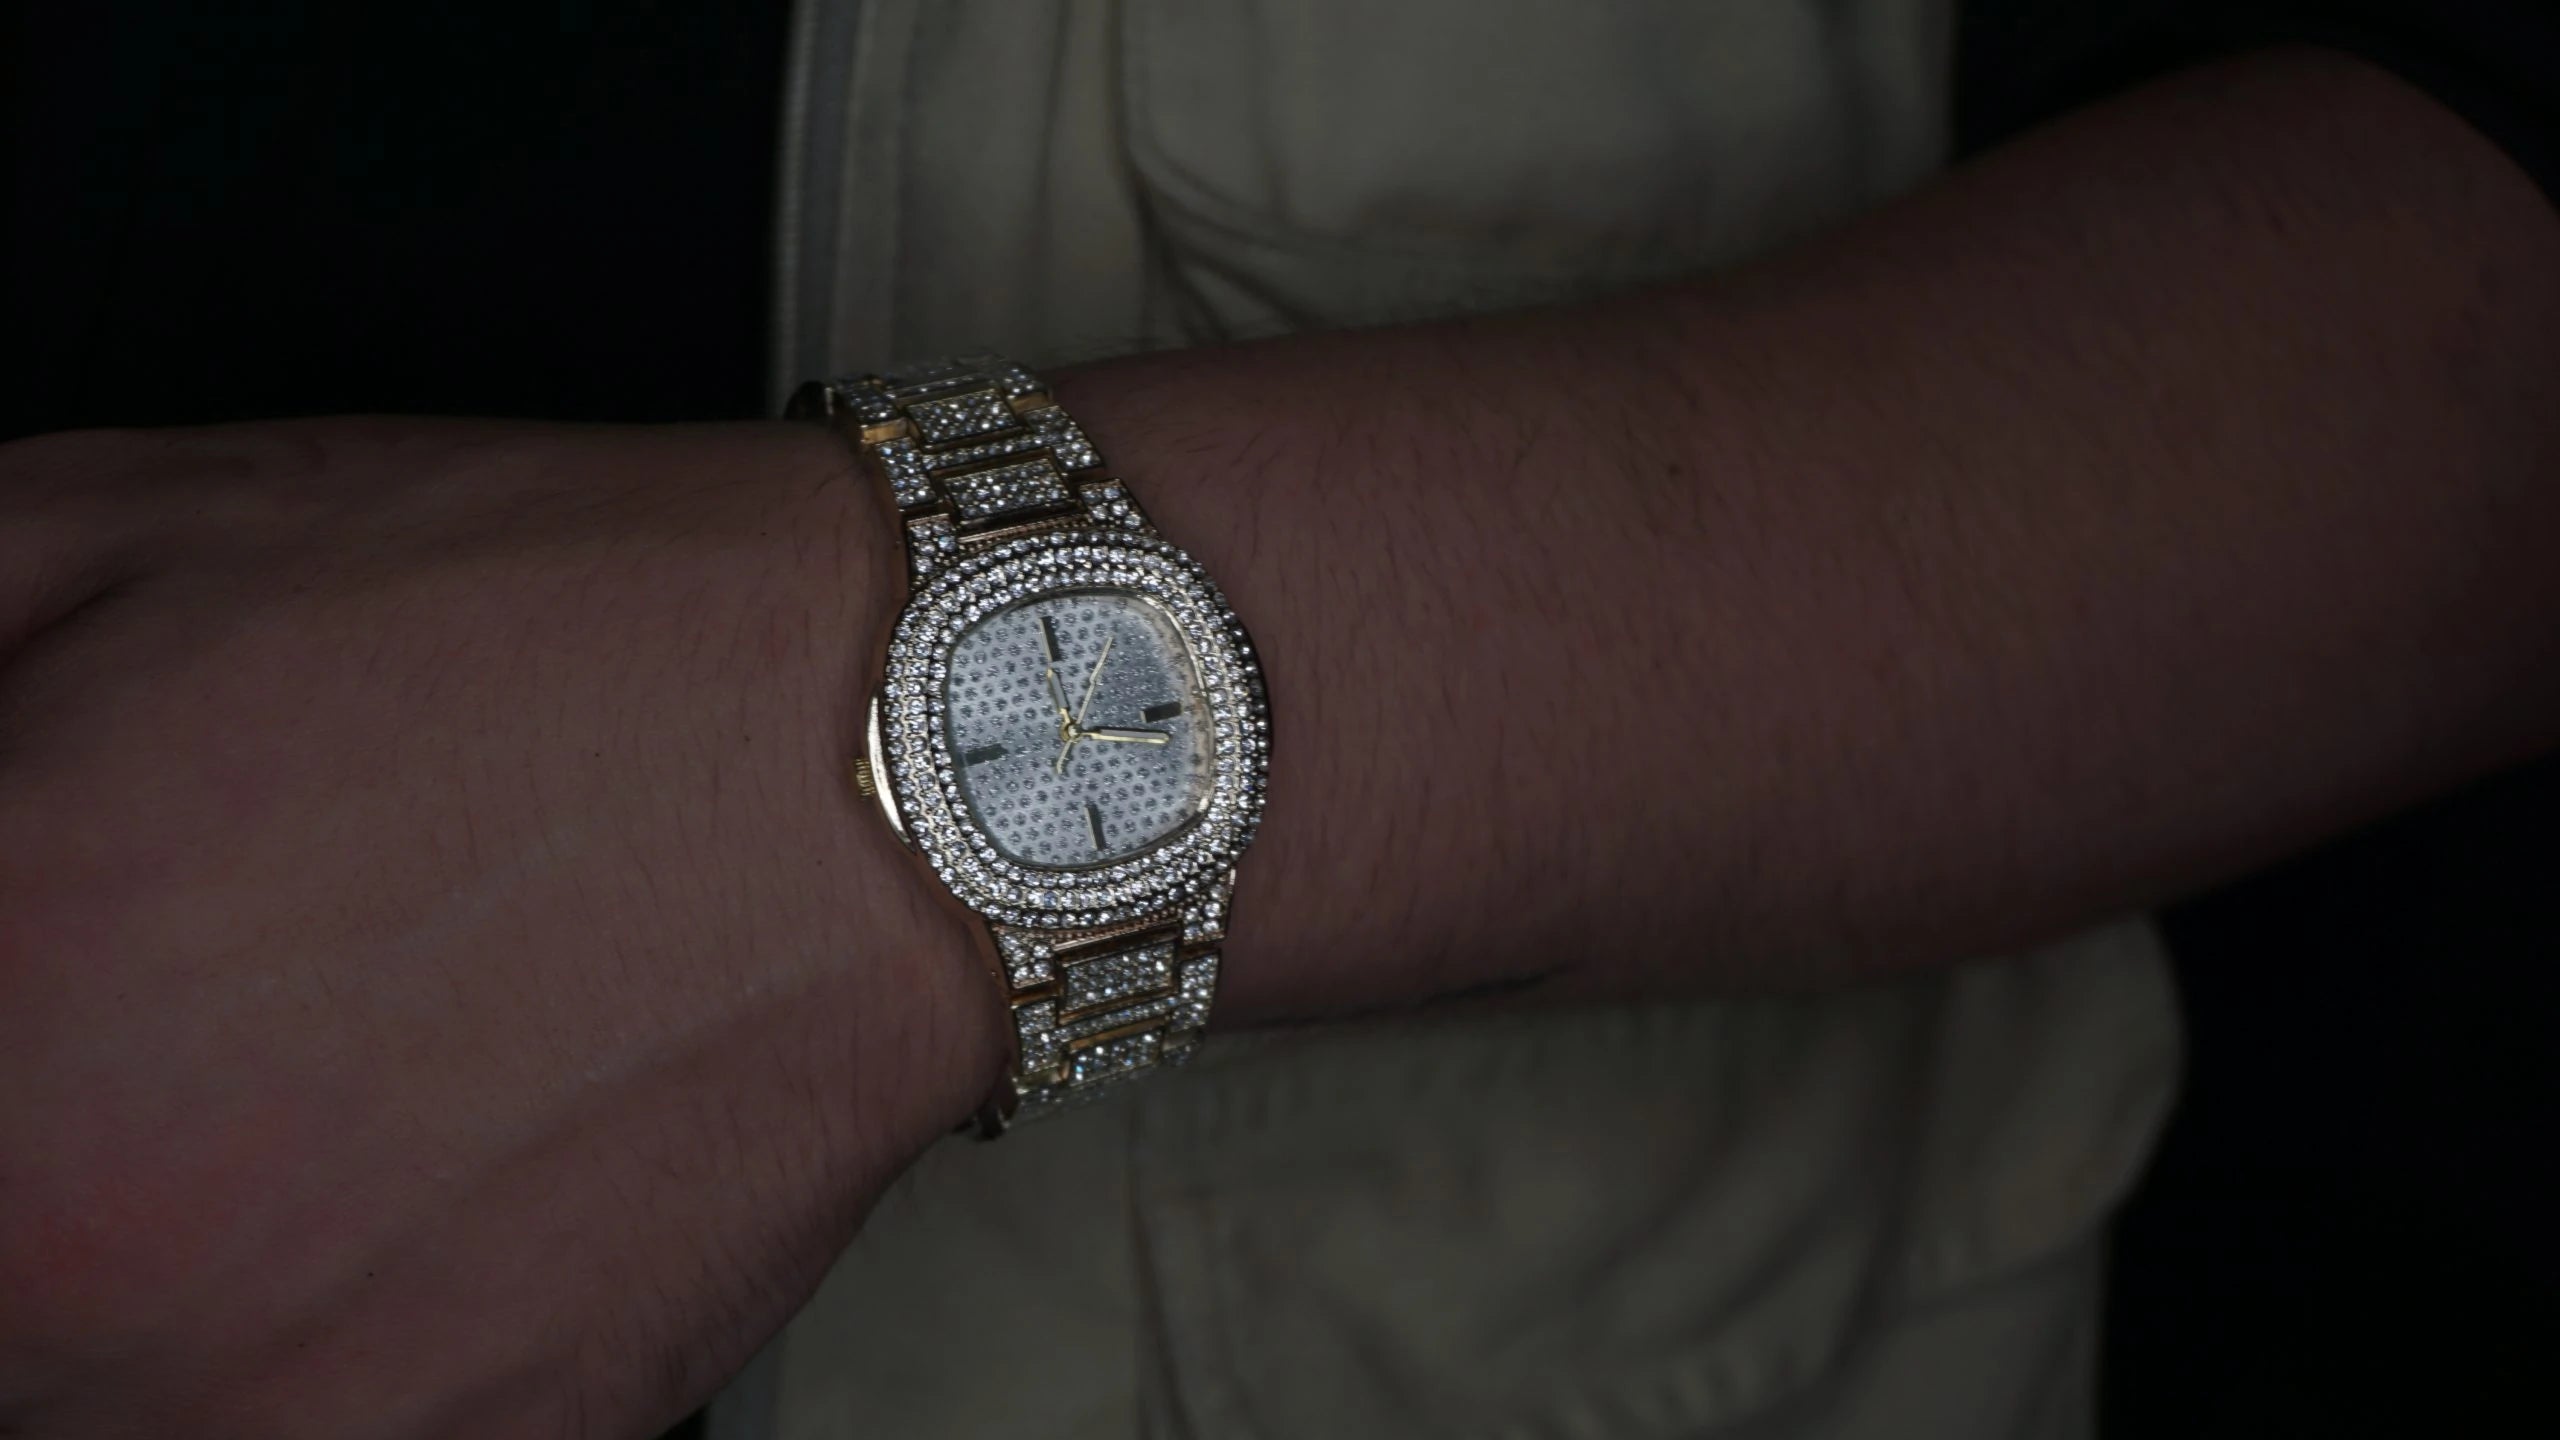 Gold Mini Choppers Iced Out Watch